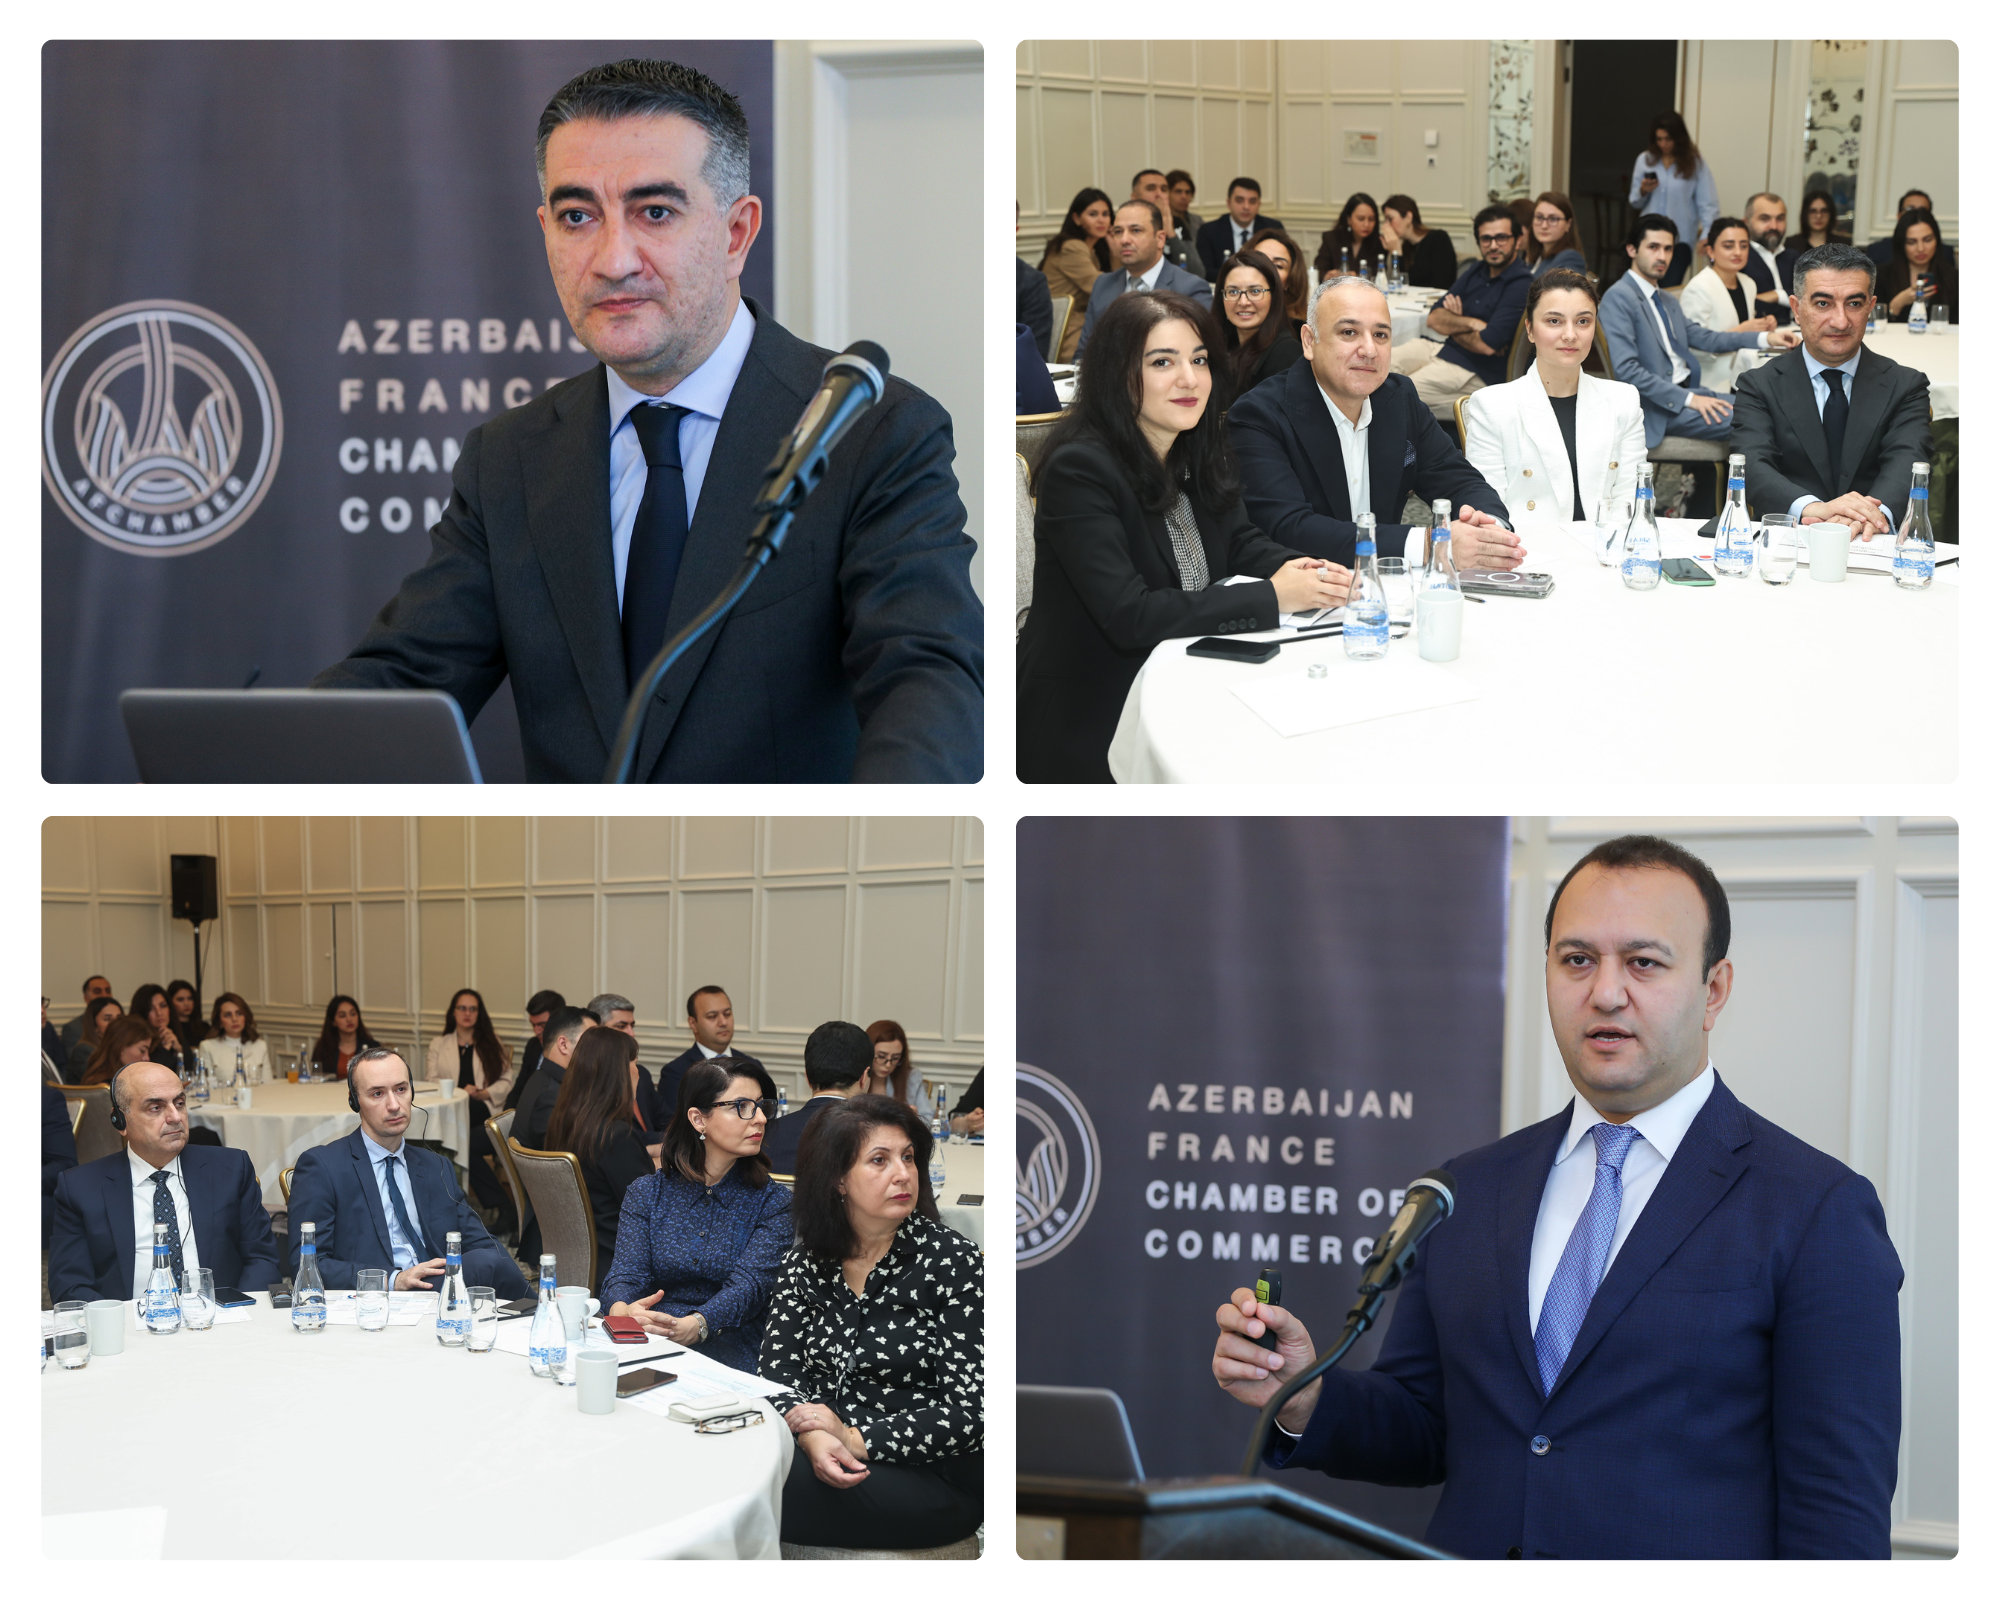 AFchamber Tax, Legal, and Finance Committee held an Event on Advancing Competition and Public Procurement: Regulatory Reforms with Antimonopoly and Consumer Market Control under the Ministry of Economy of Azerbaijan.